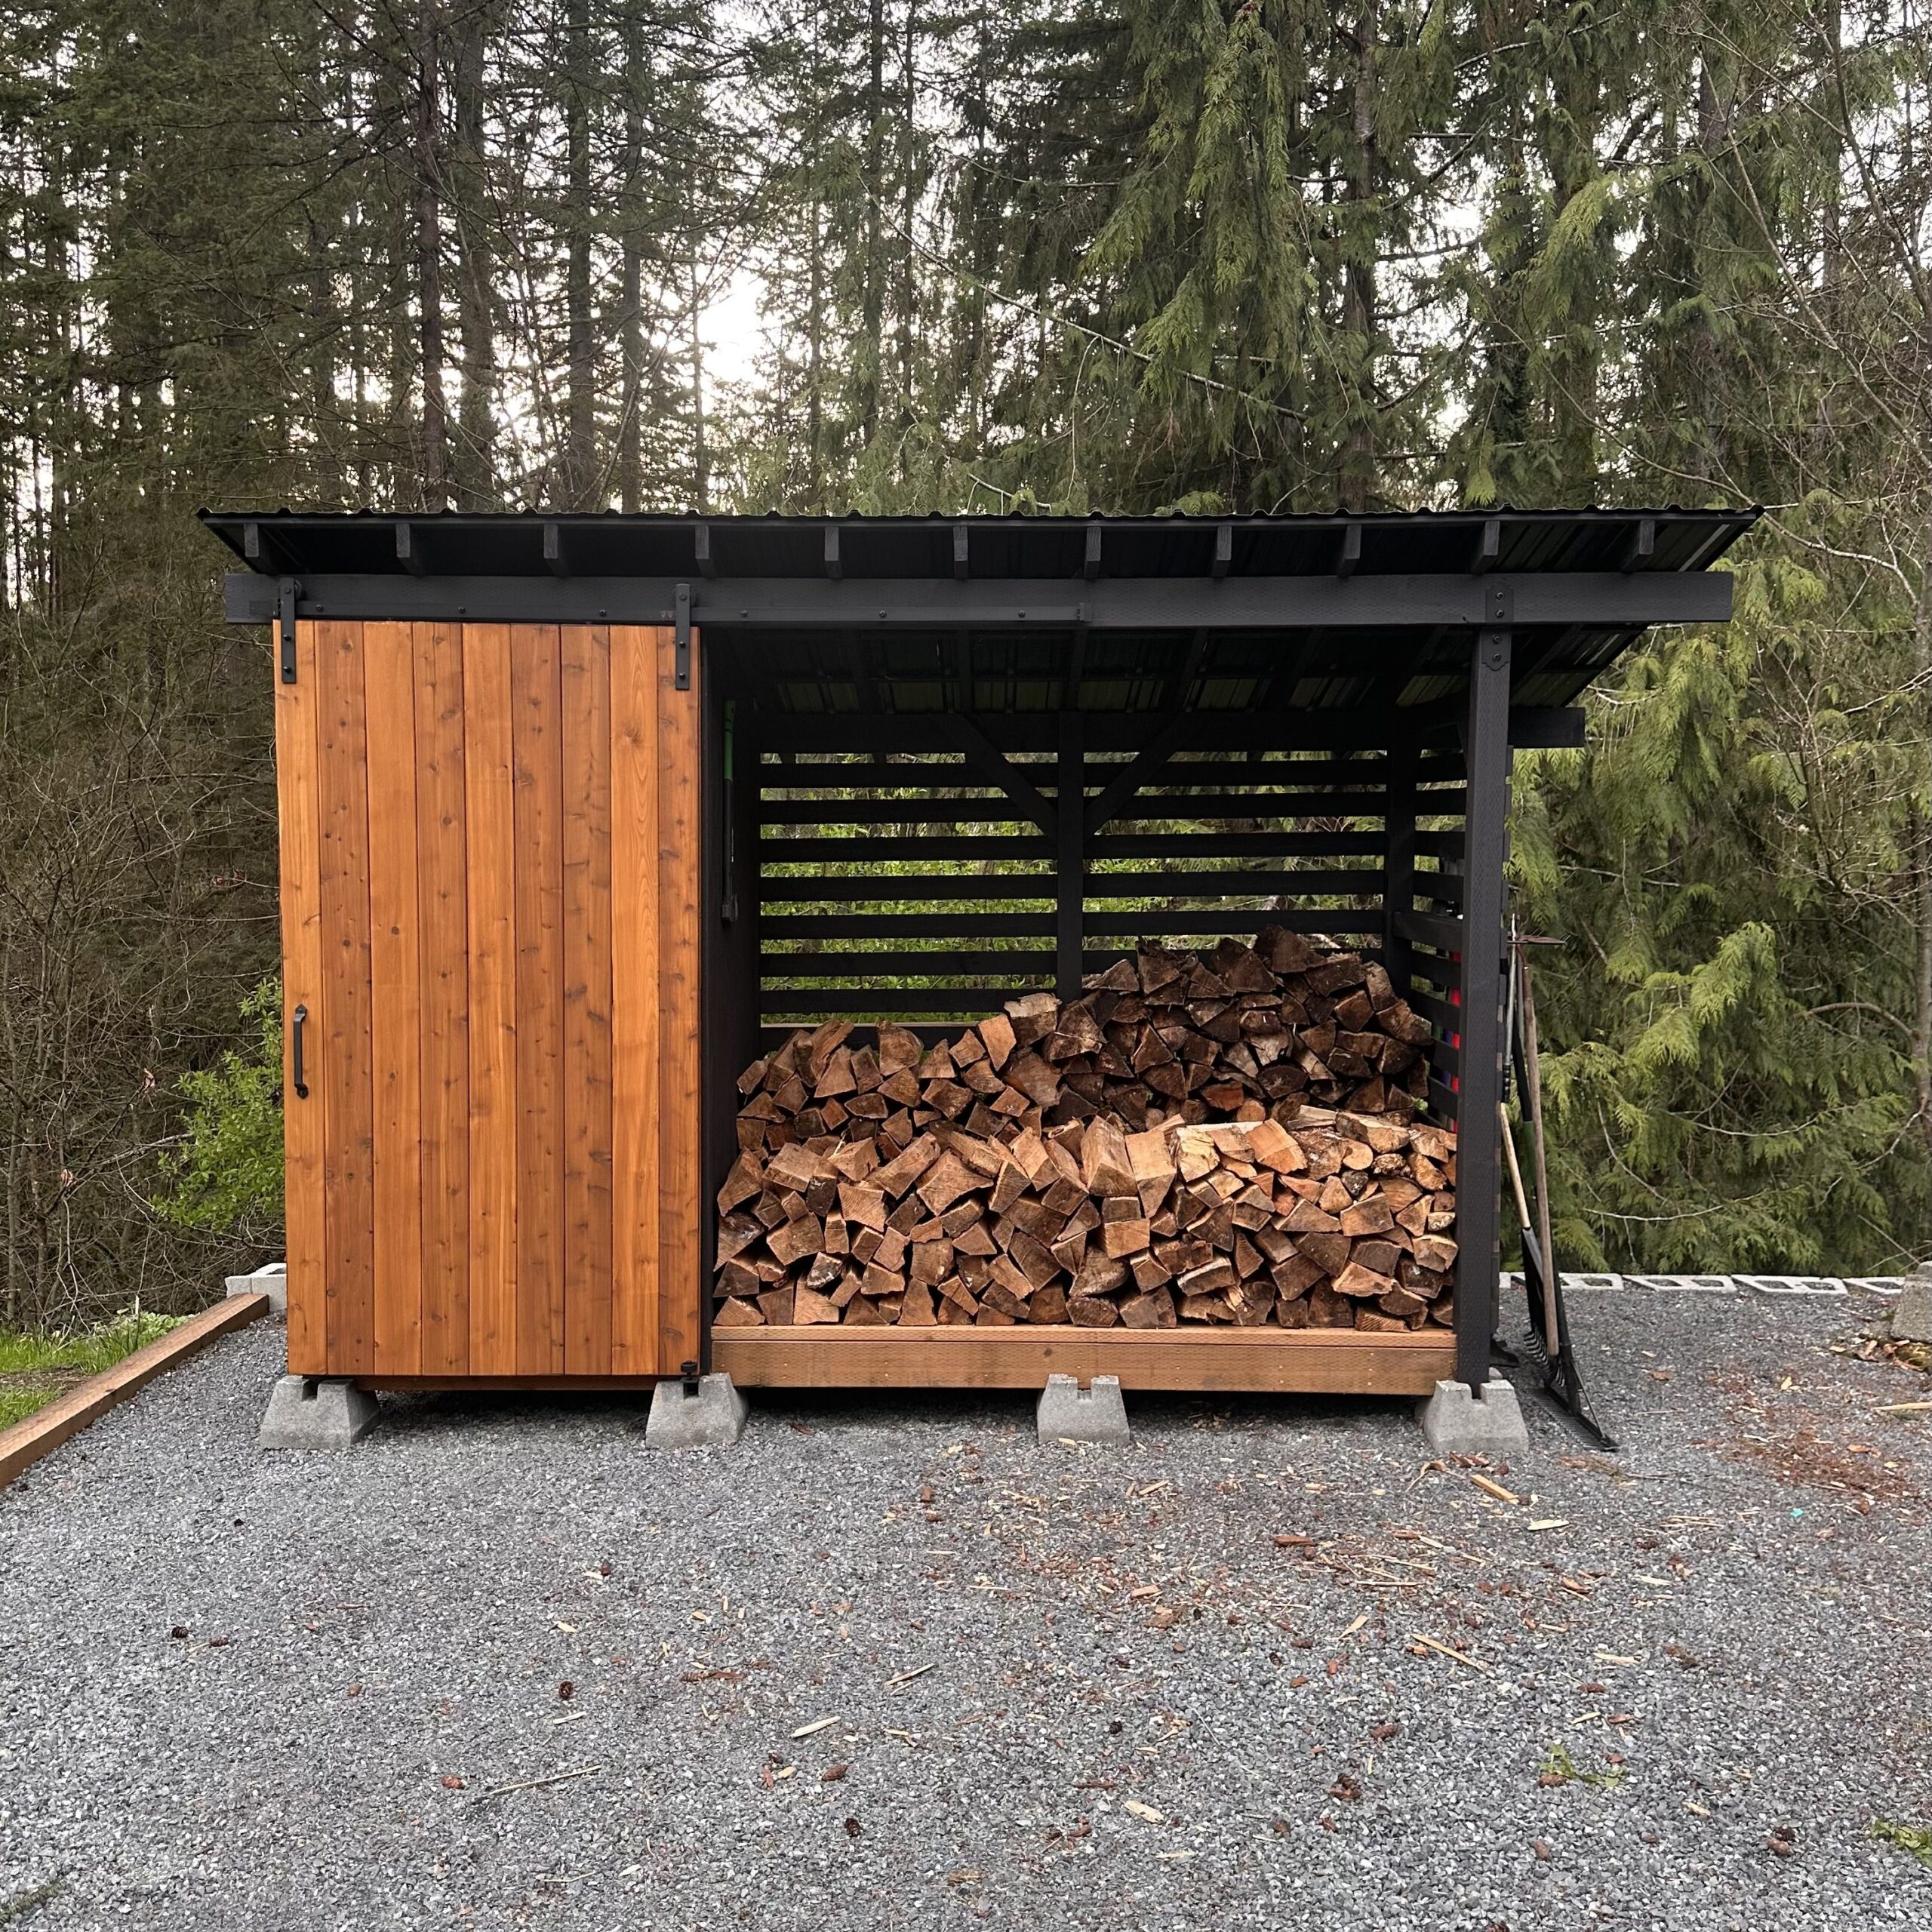 Get the best wood shed